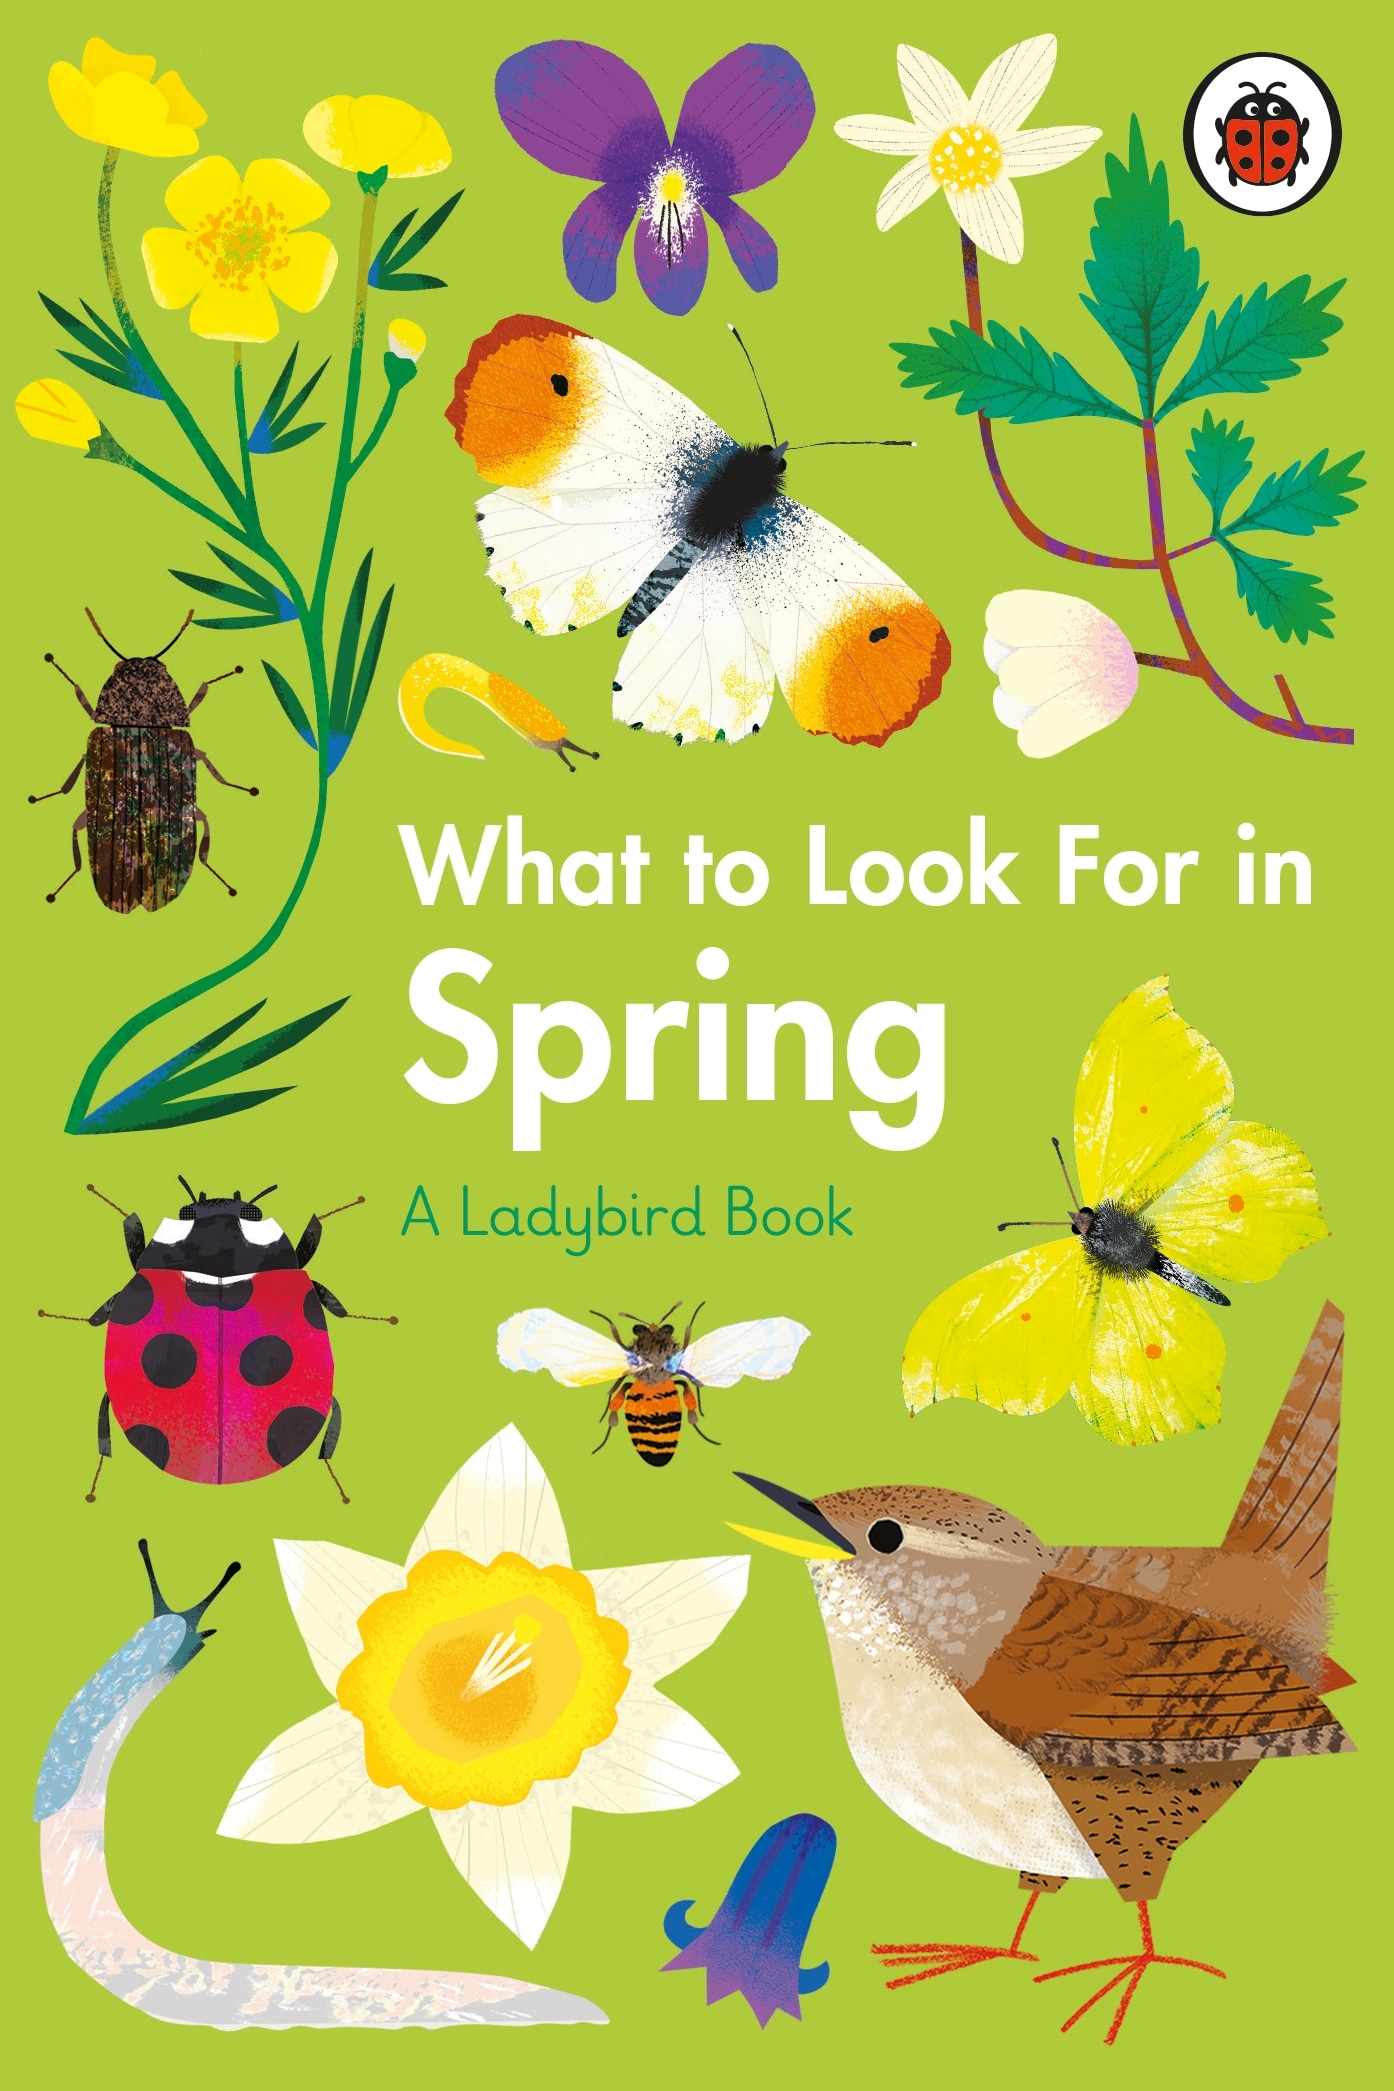 Book “What to Look For in Spring” by Elizabeth Jenner, Natasha Durley — January 21, 2021